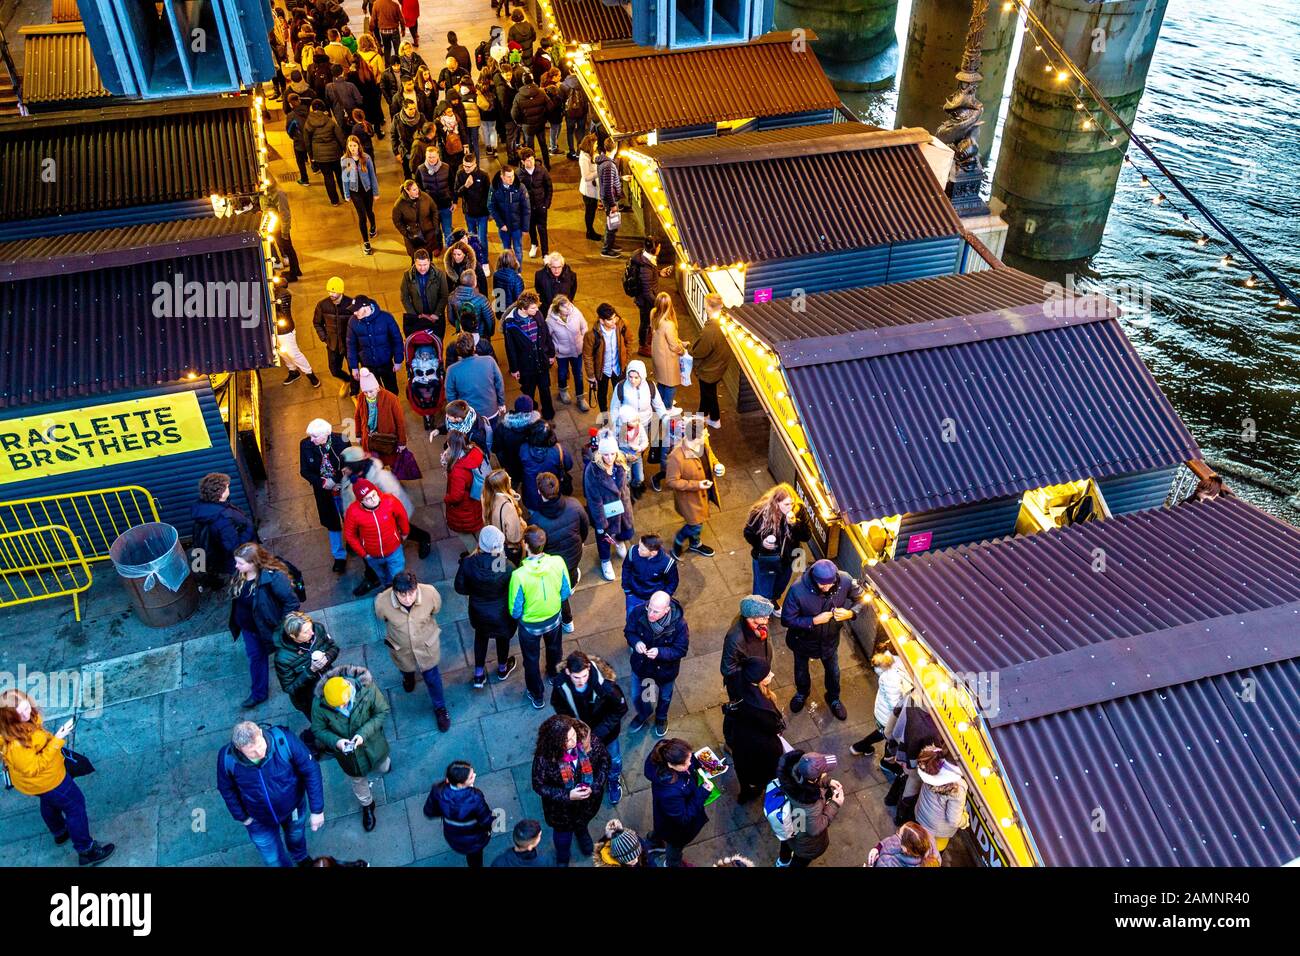 People looking at stalls at festive Southbank Centre Winter Market, London, UK Stock Photo